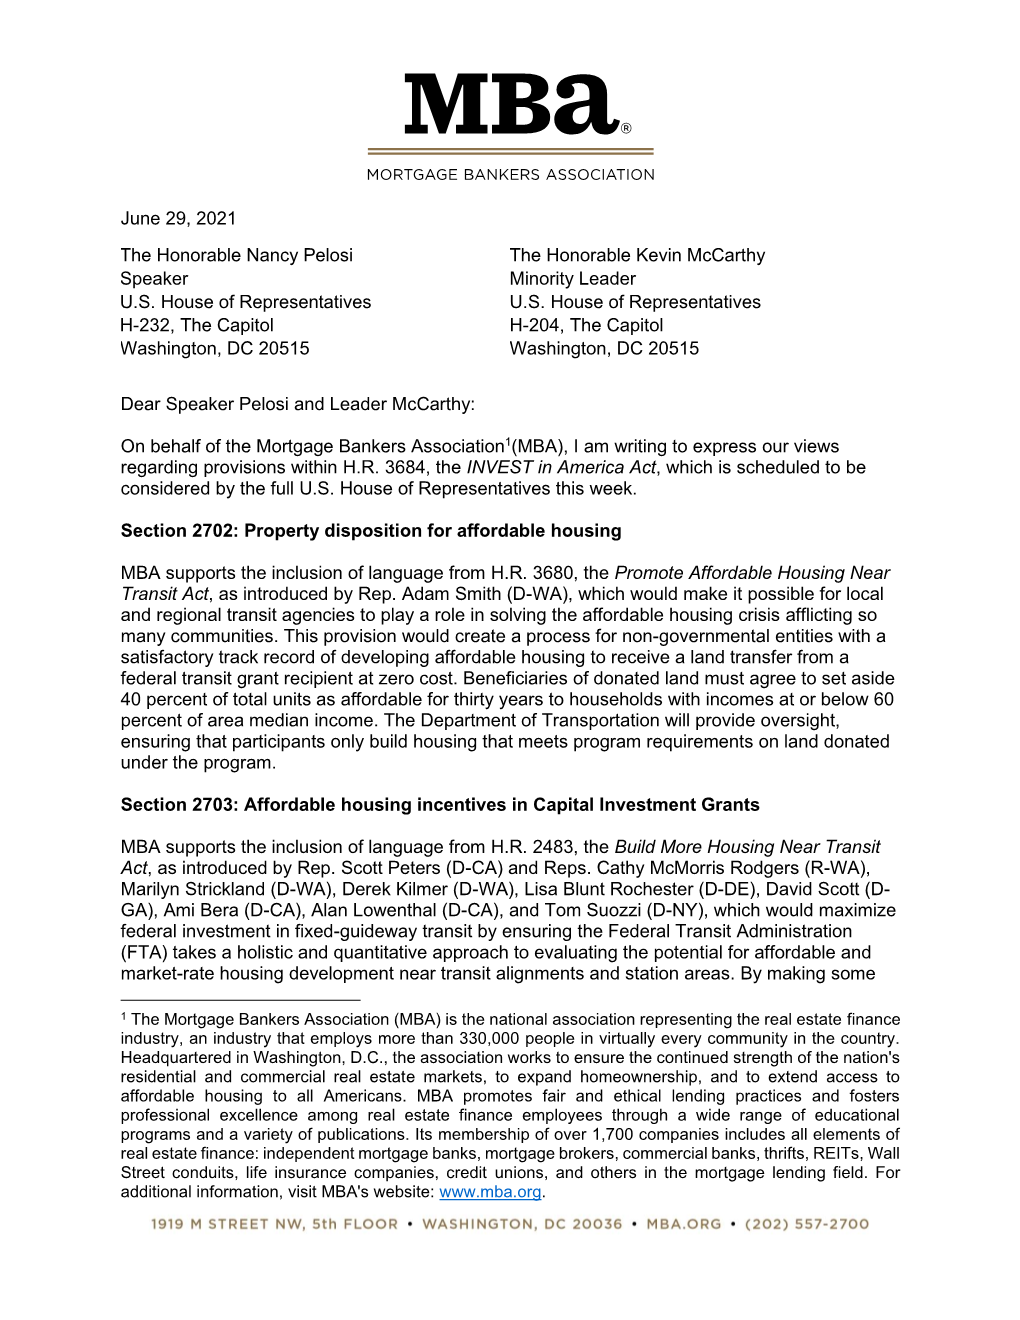 MBA Letter to House on H.R. 3684